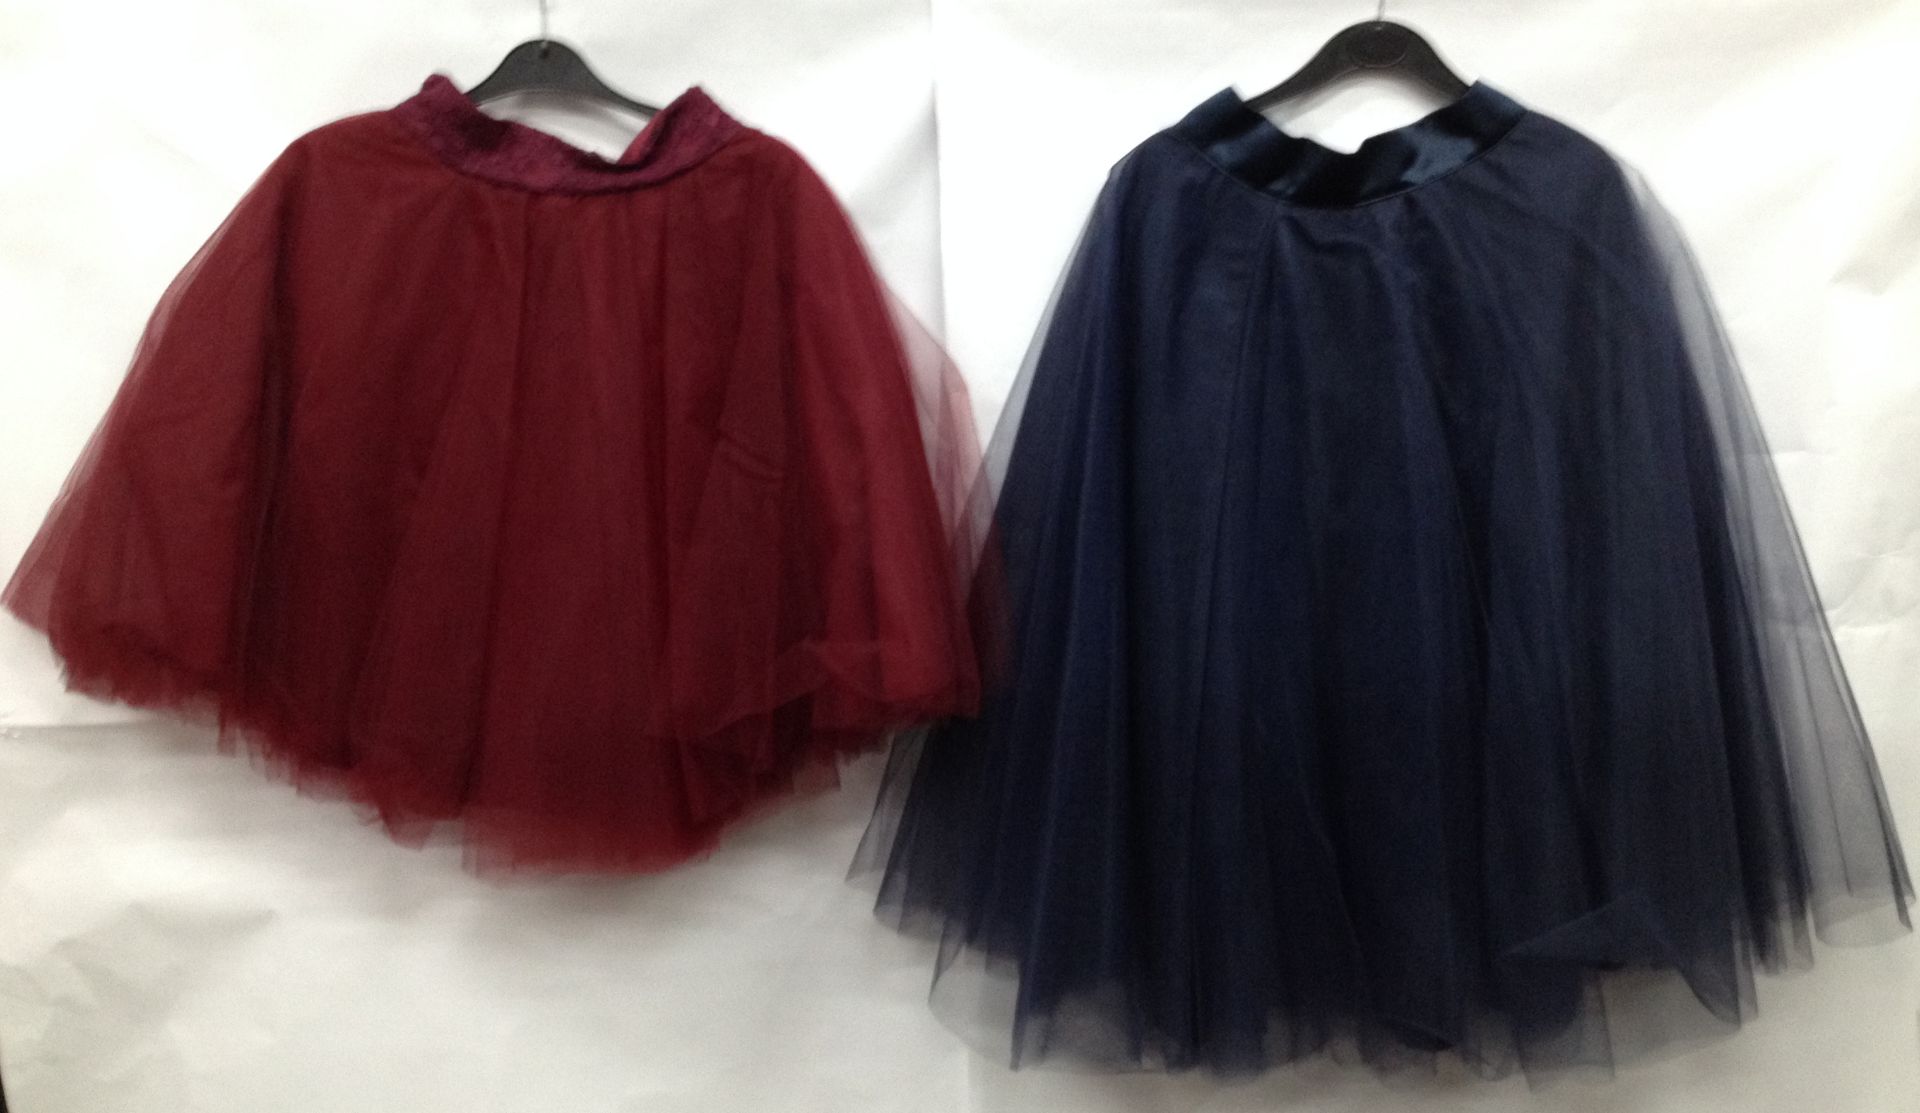 23 x Mixed Style Skirts - Image 2 of 7